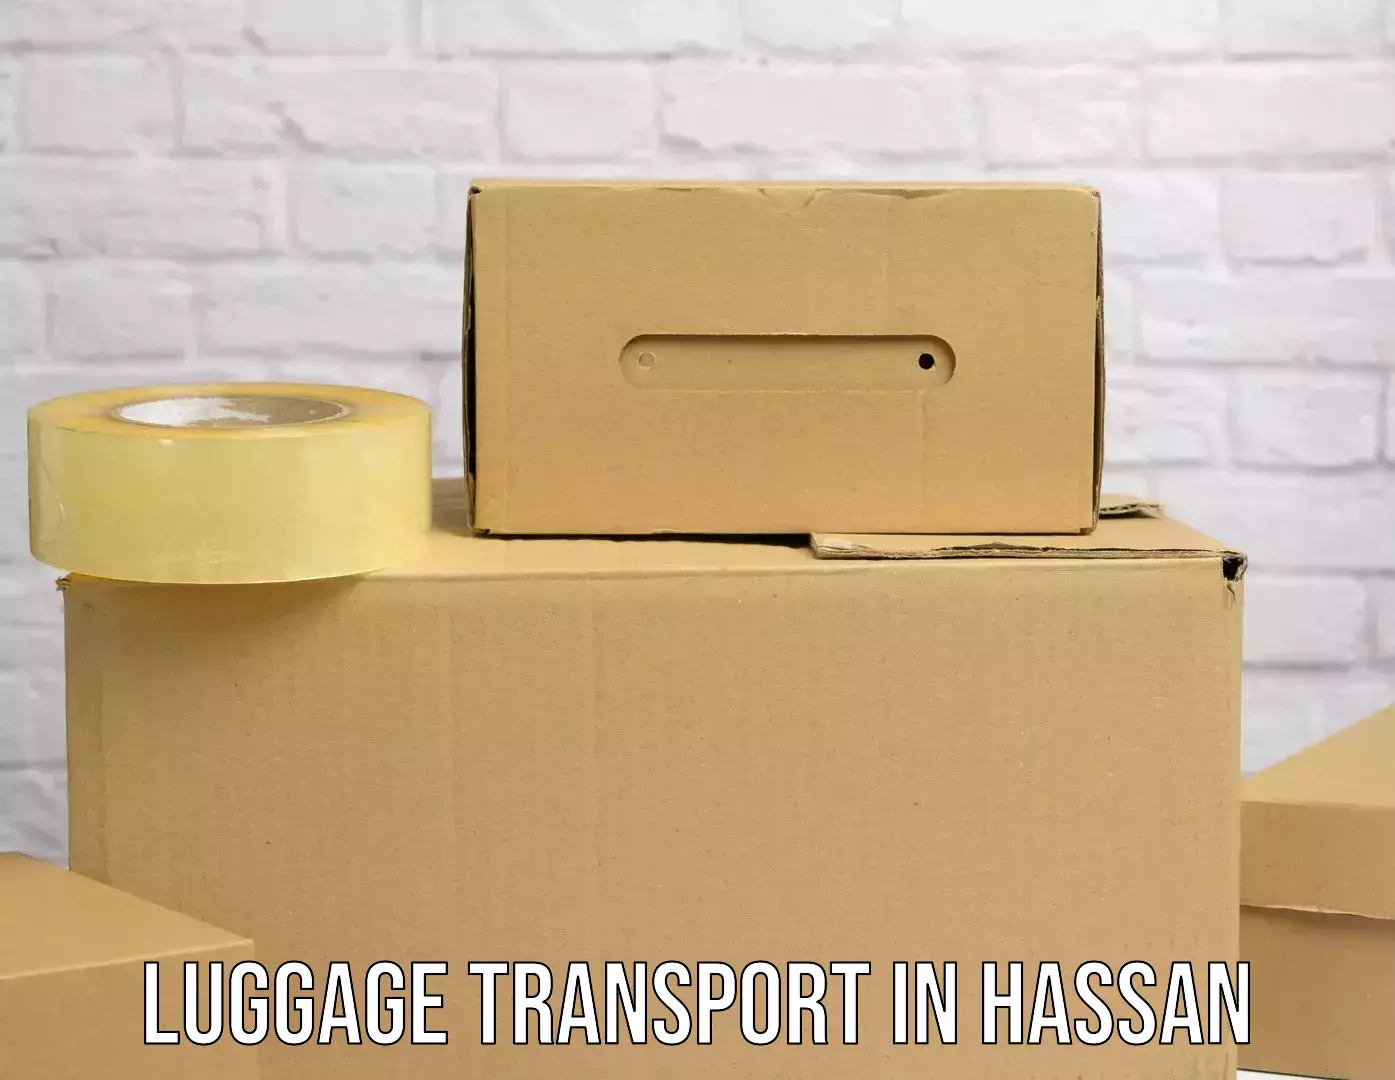 Simplified luggage transport in Hassan